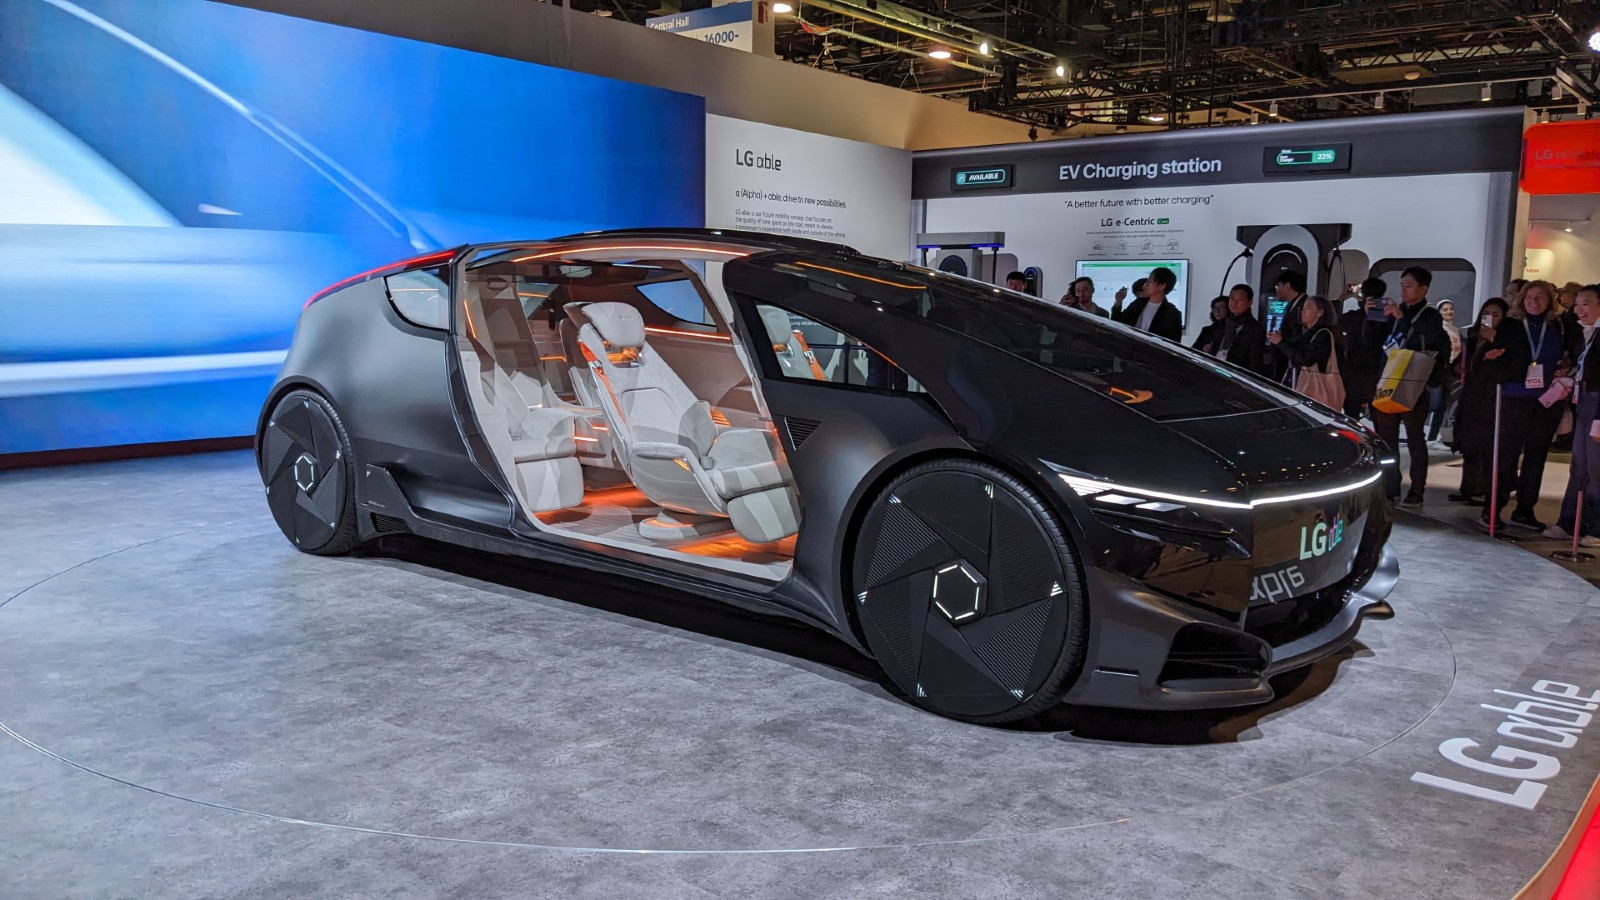 A futuristic car is on display at an auto show.